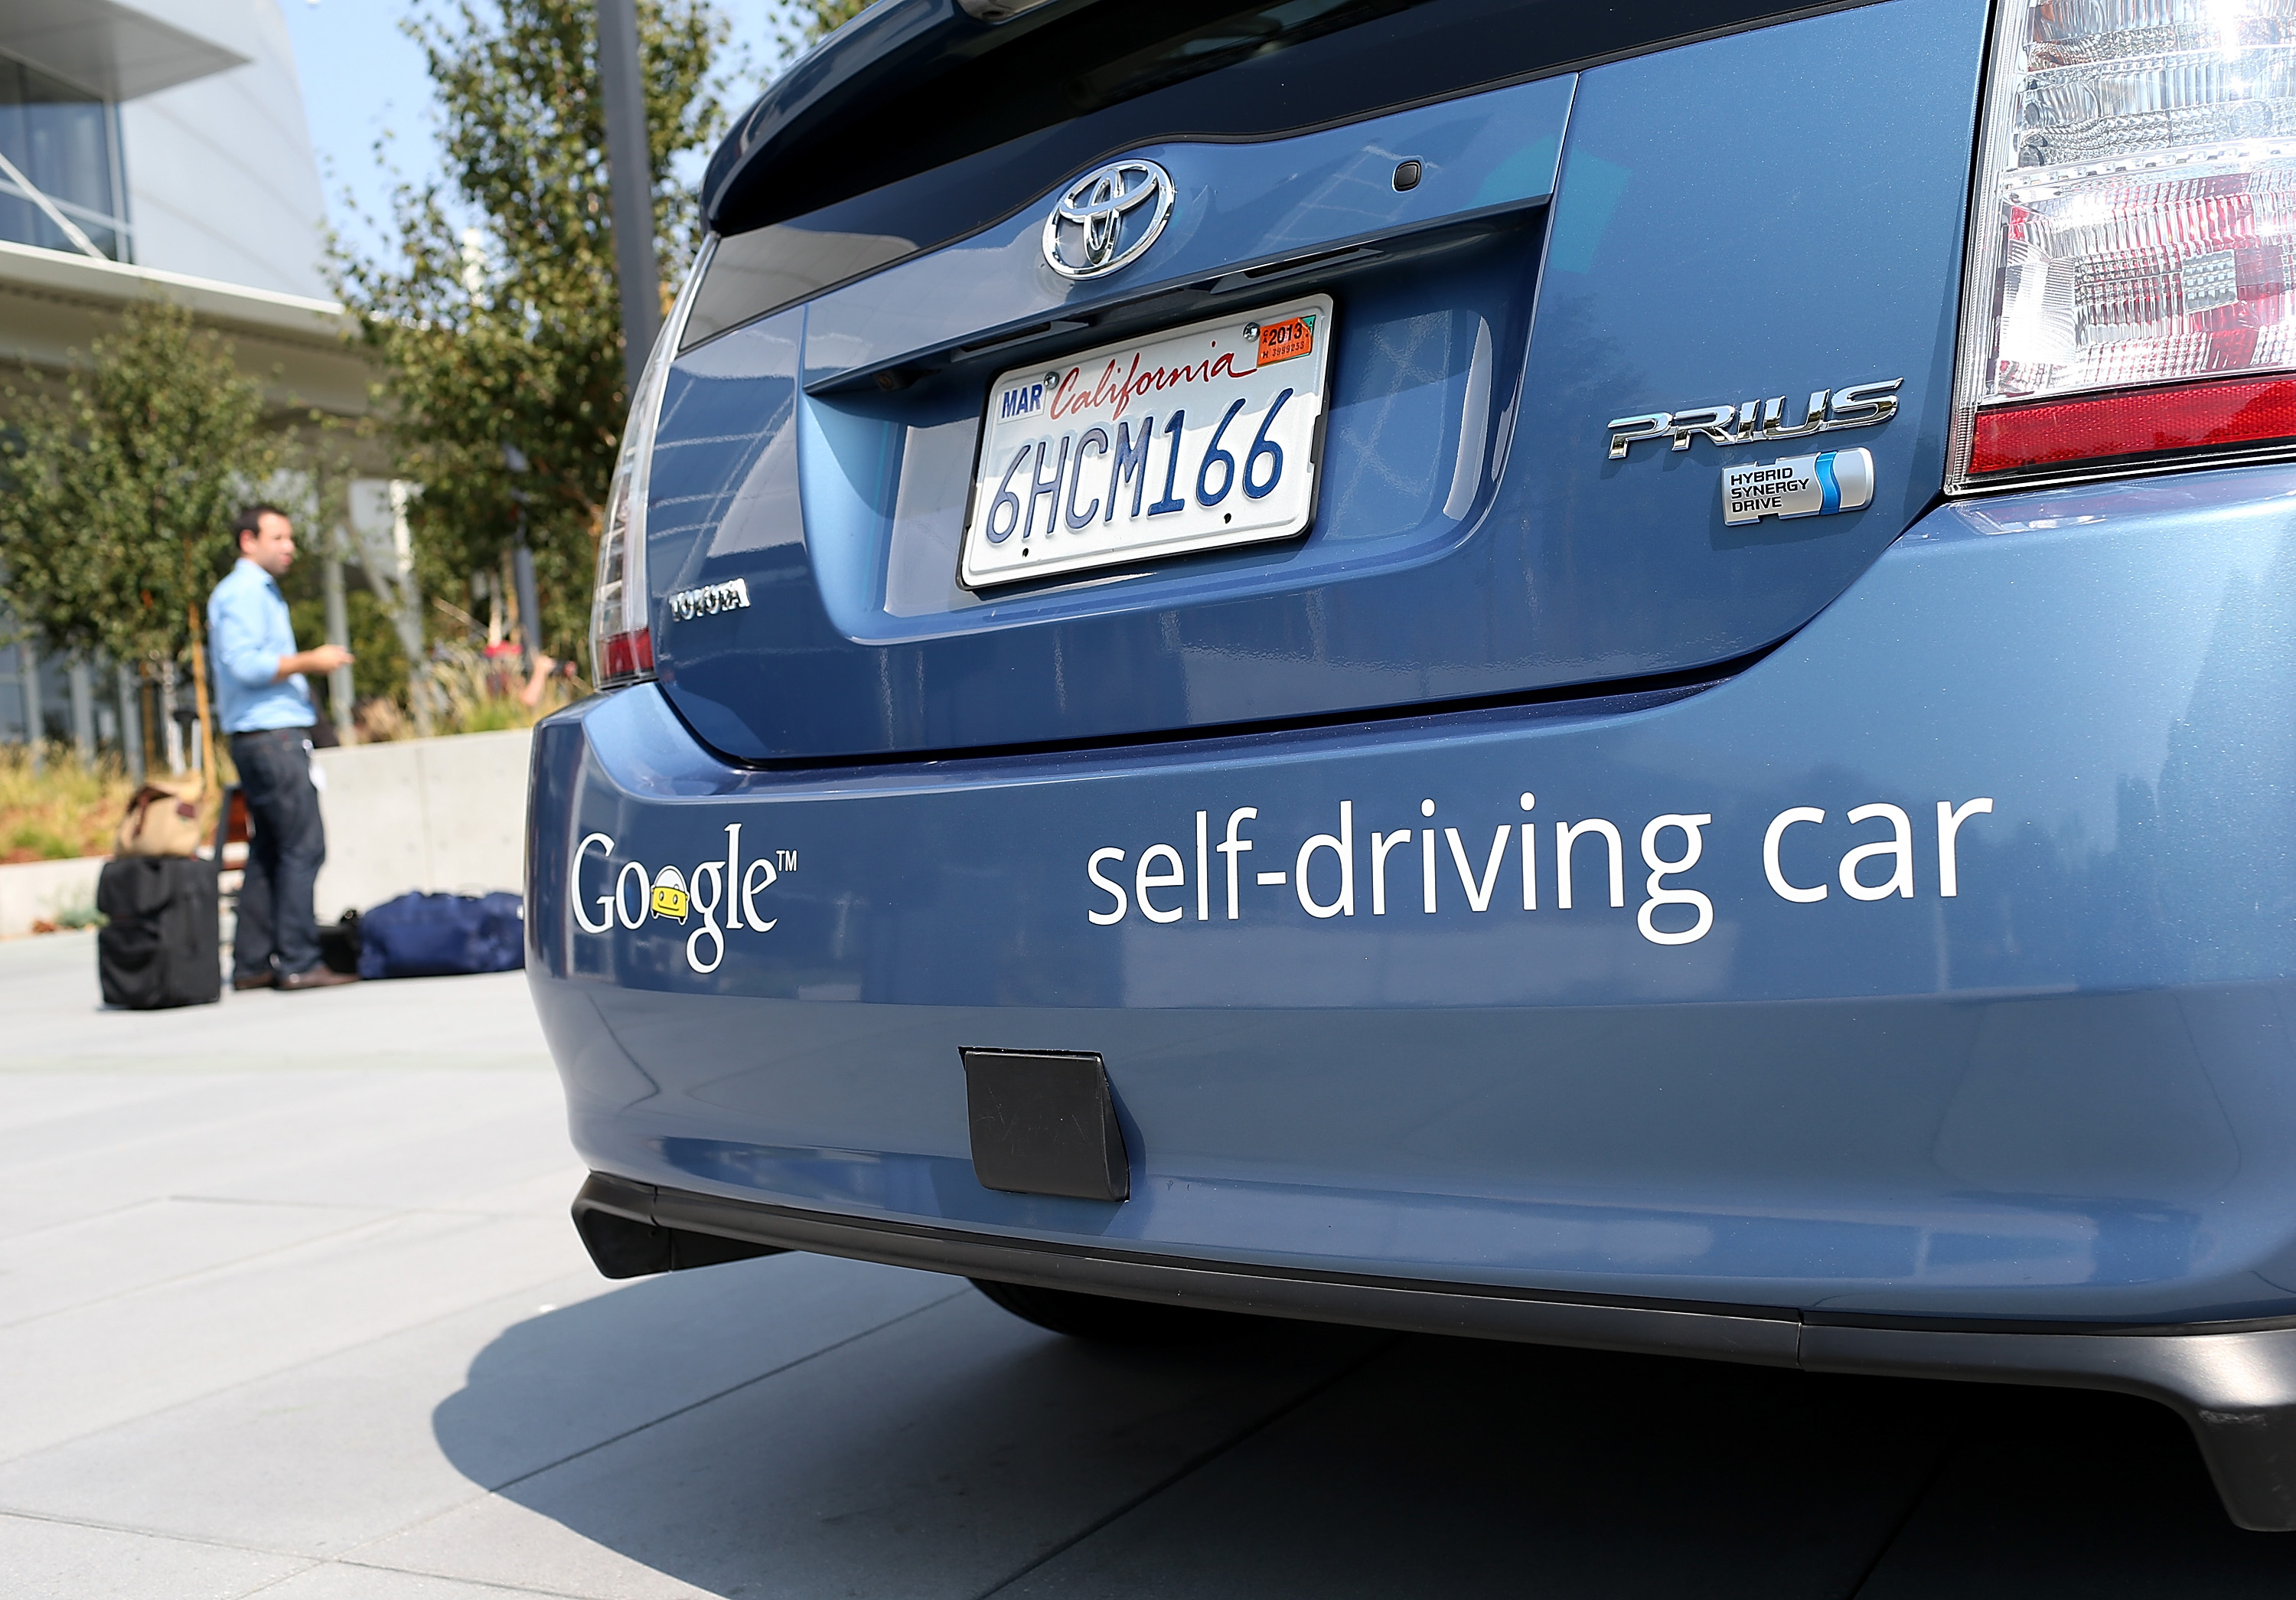 A Google self-driving car is displayed at the Google headquarters on September 25, 2012 in Mountain View, California. (Justin Sullivan&mdash;Getty Images)